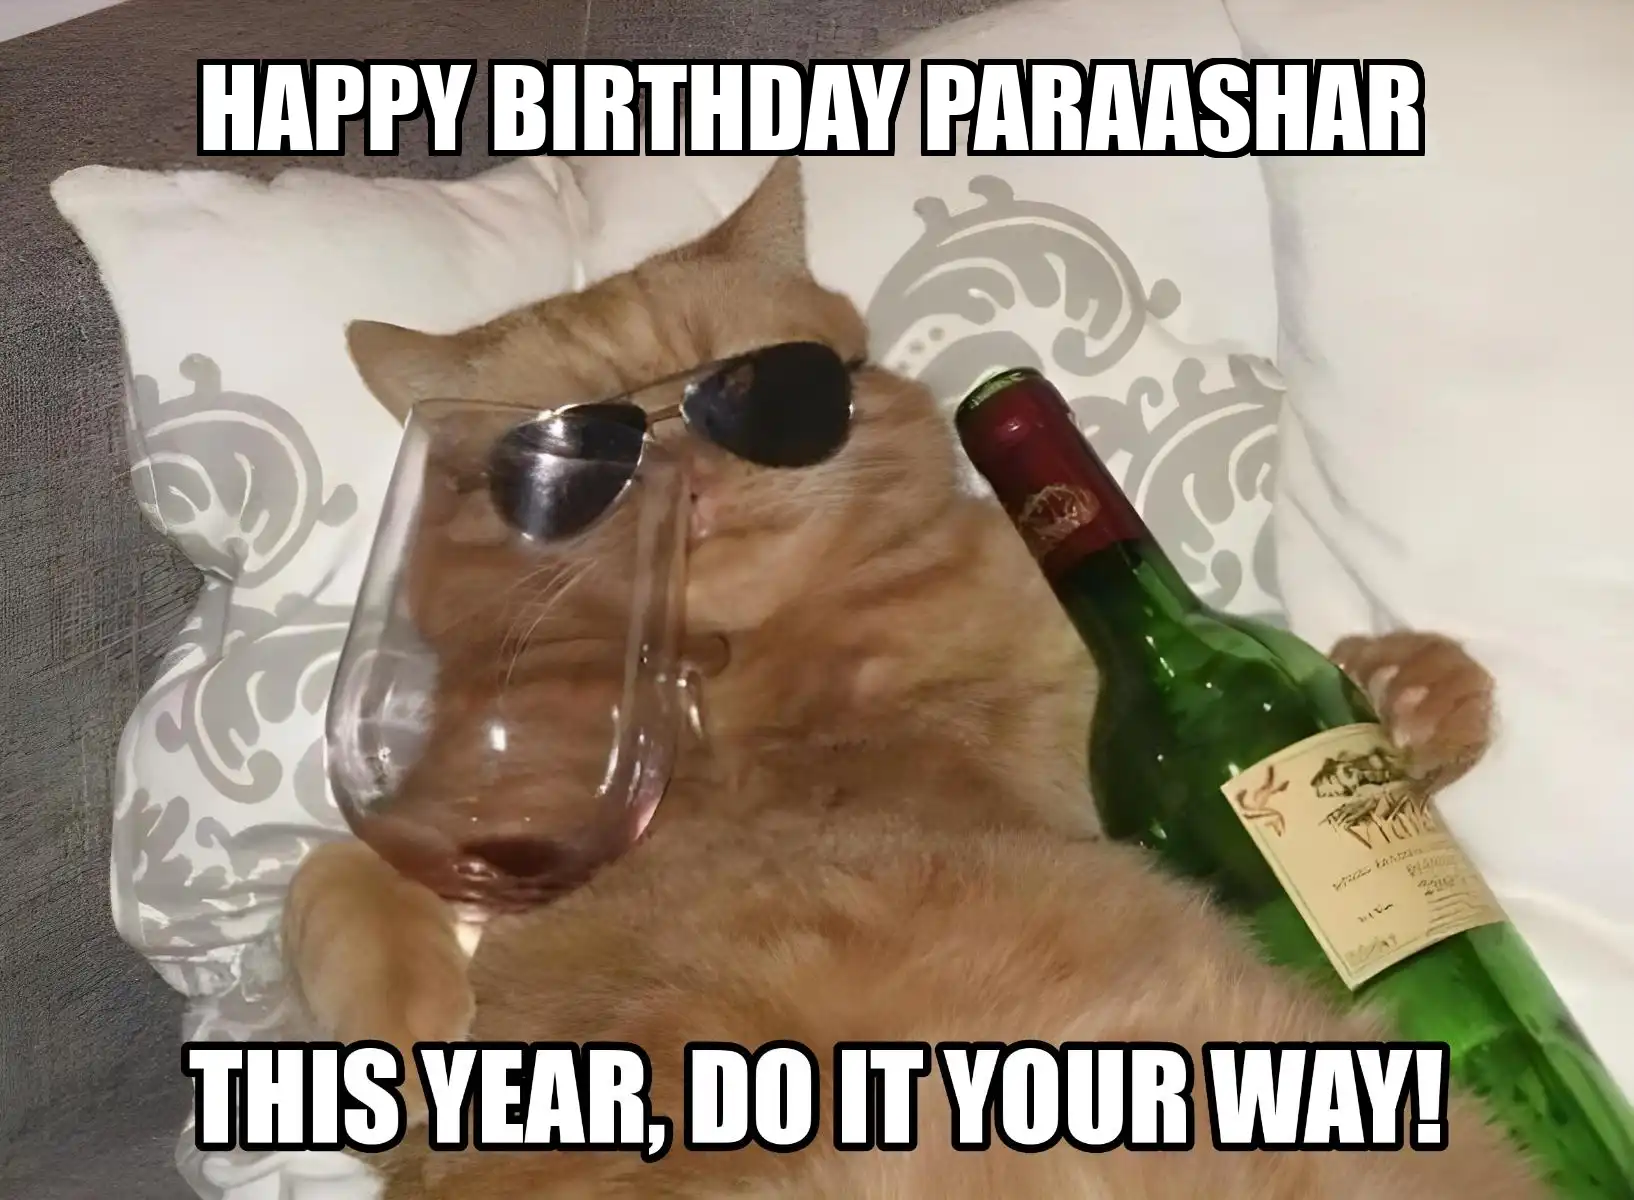 Happy Birthday Paraashar This Year Do It Your Way Meme